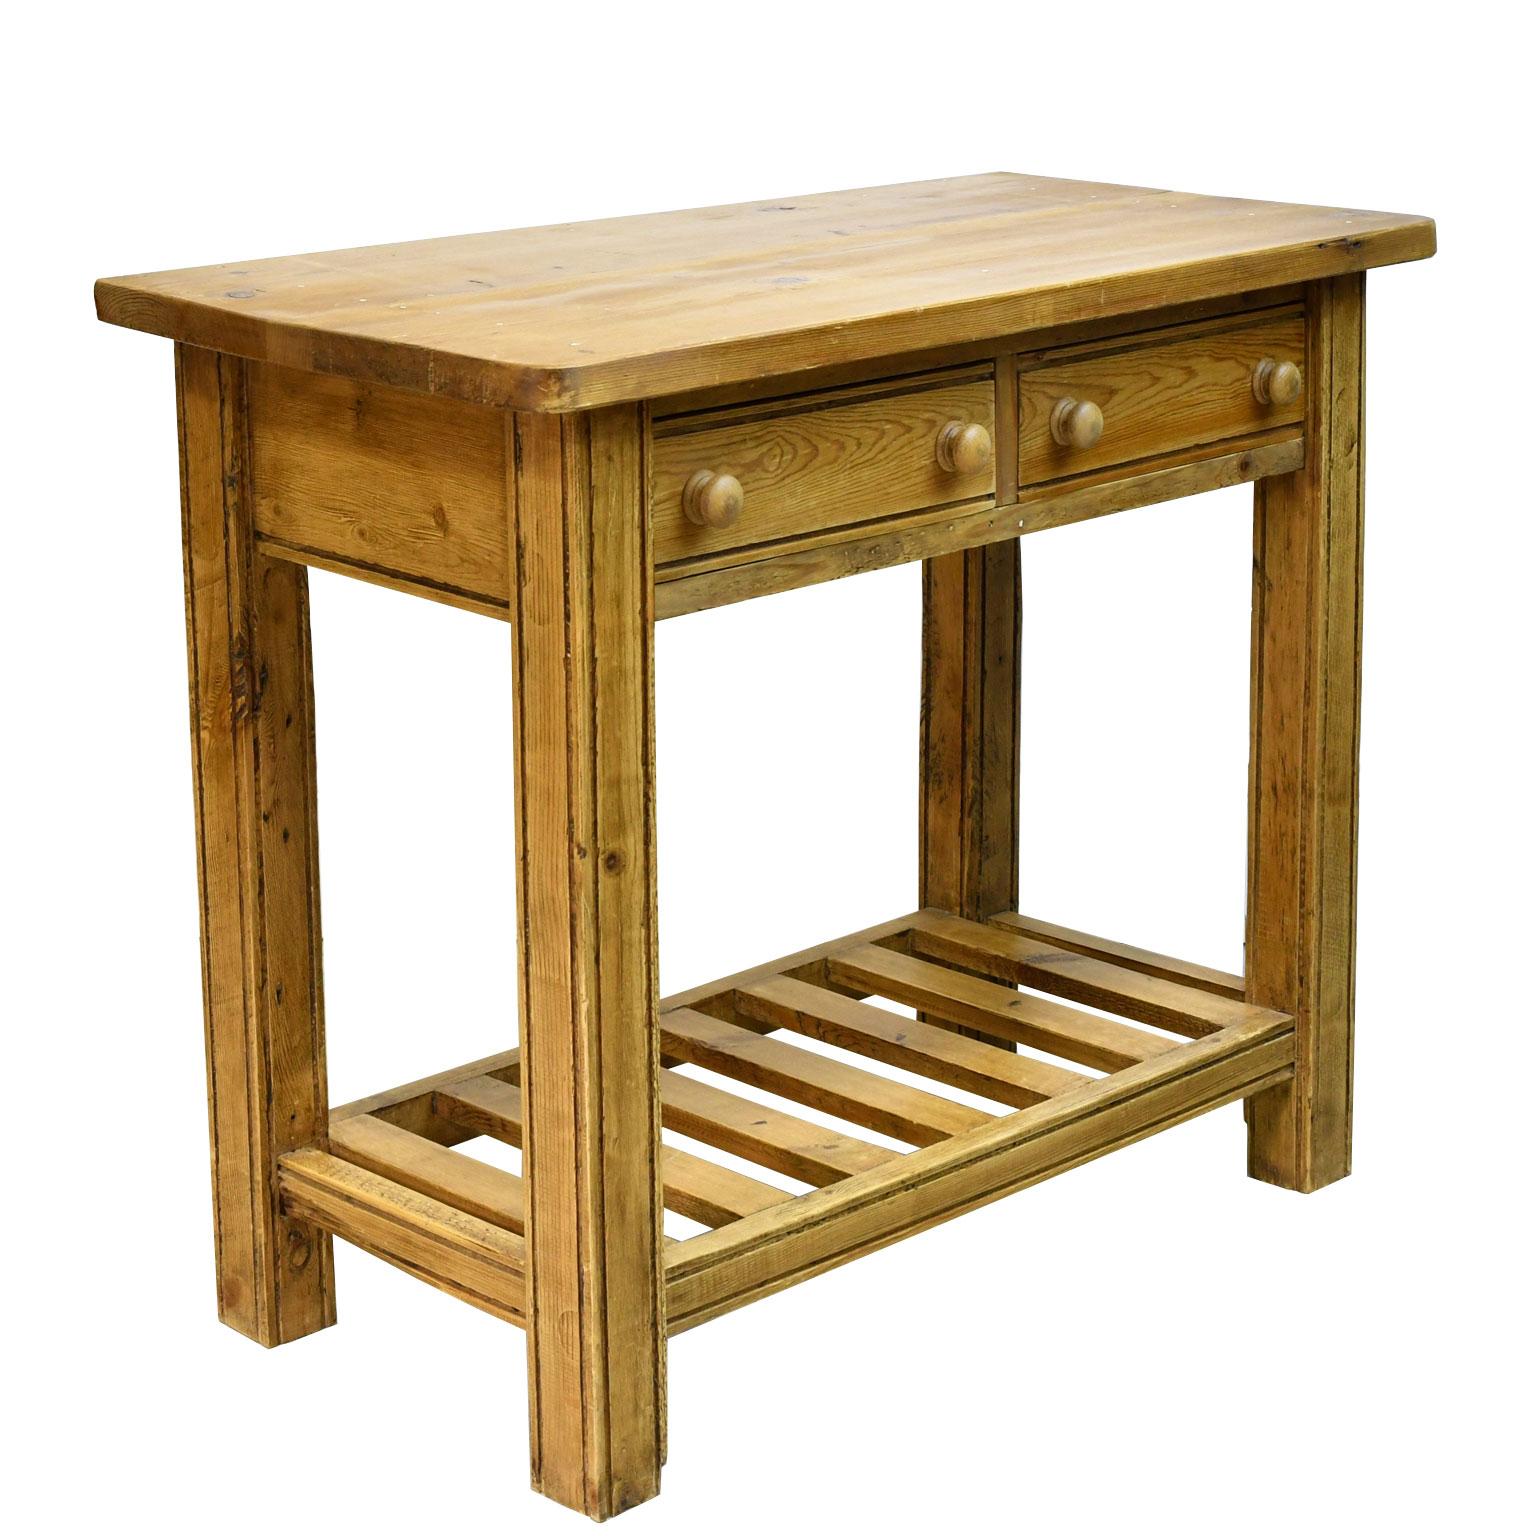 A vintage and rustic English pine table made from antique elements and repurposed wood with square legs, two drawers with turned knobs, and bottom shelf. Lots of charm and character!
Size: 37 3/8